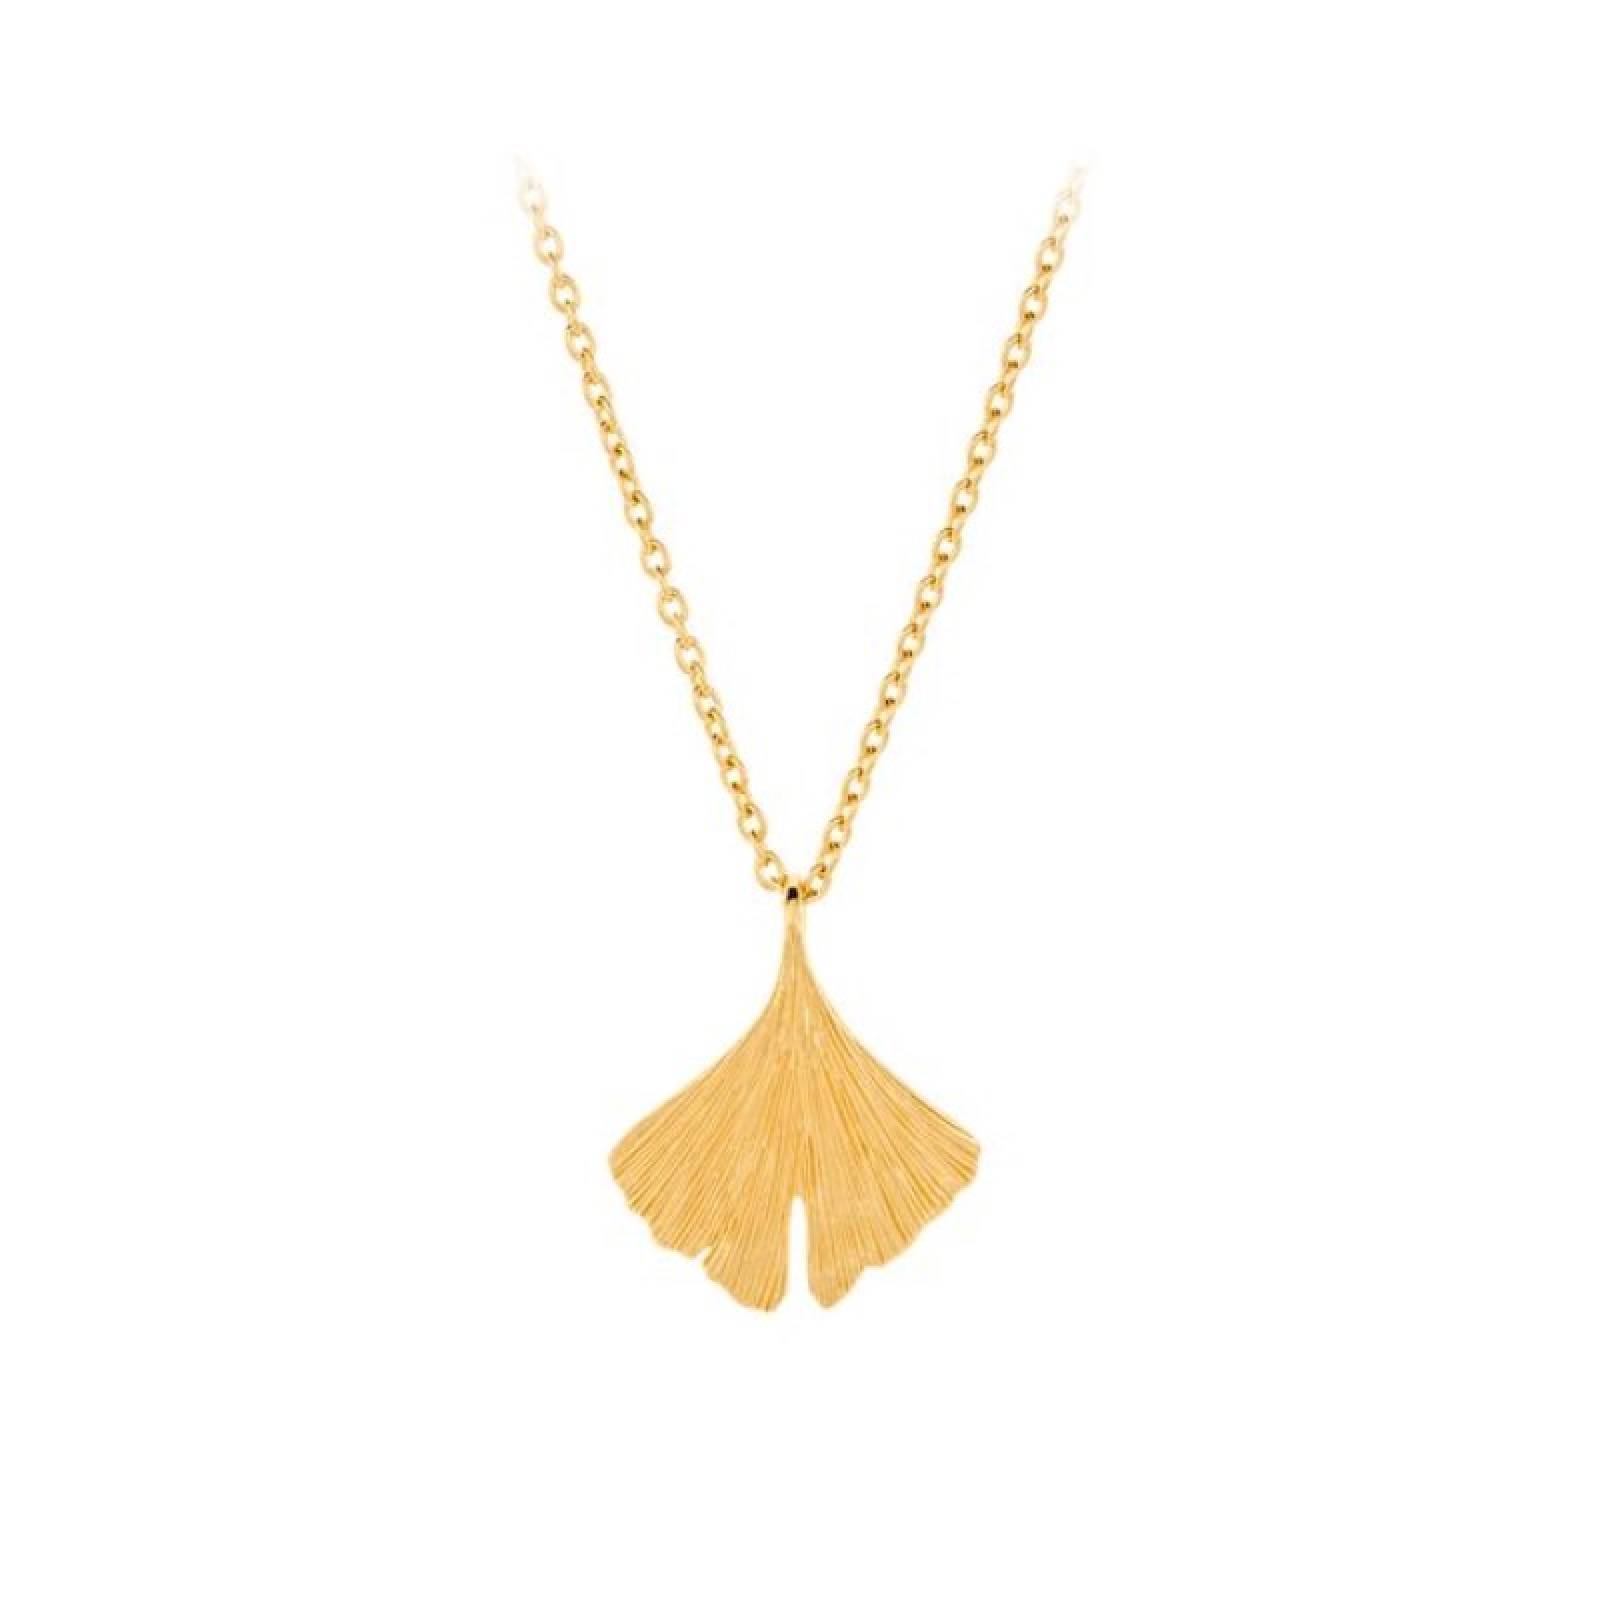 Biloba Necklace In Gold By Pernille Corydon